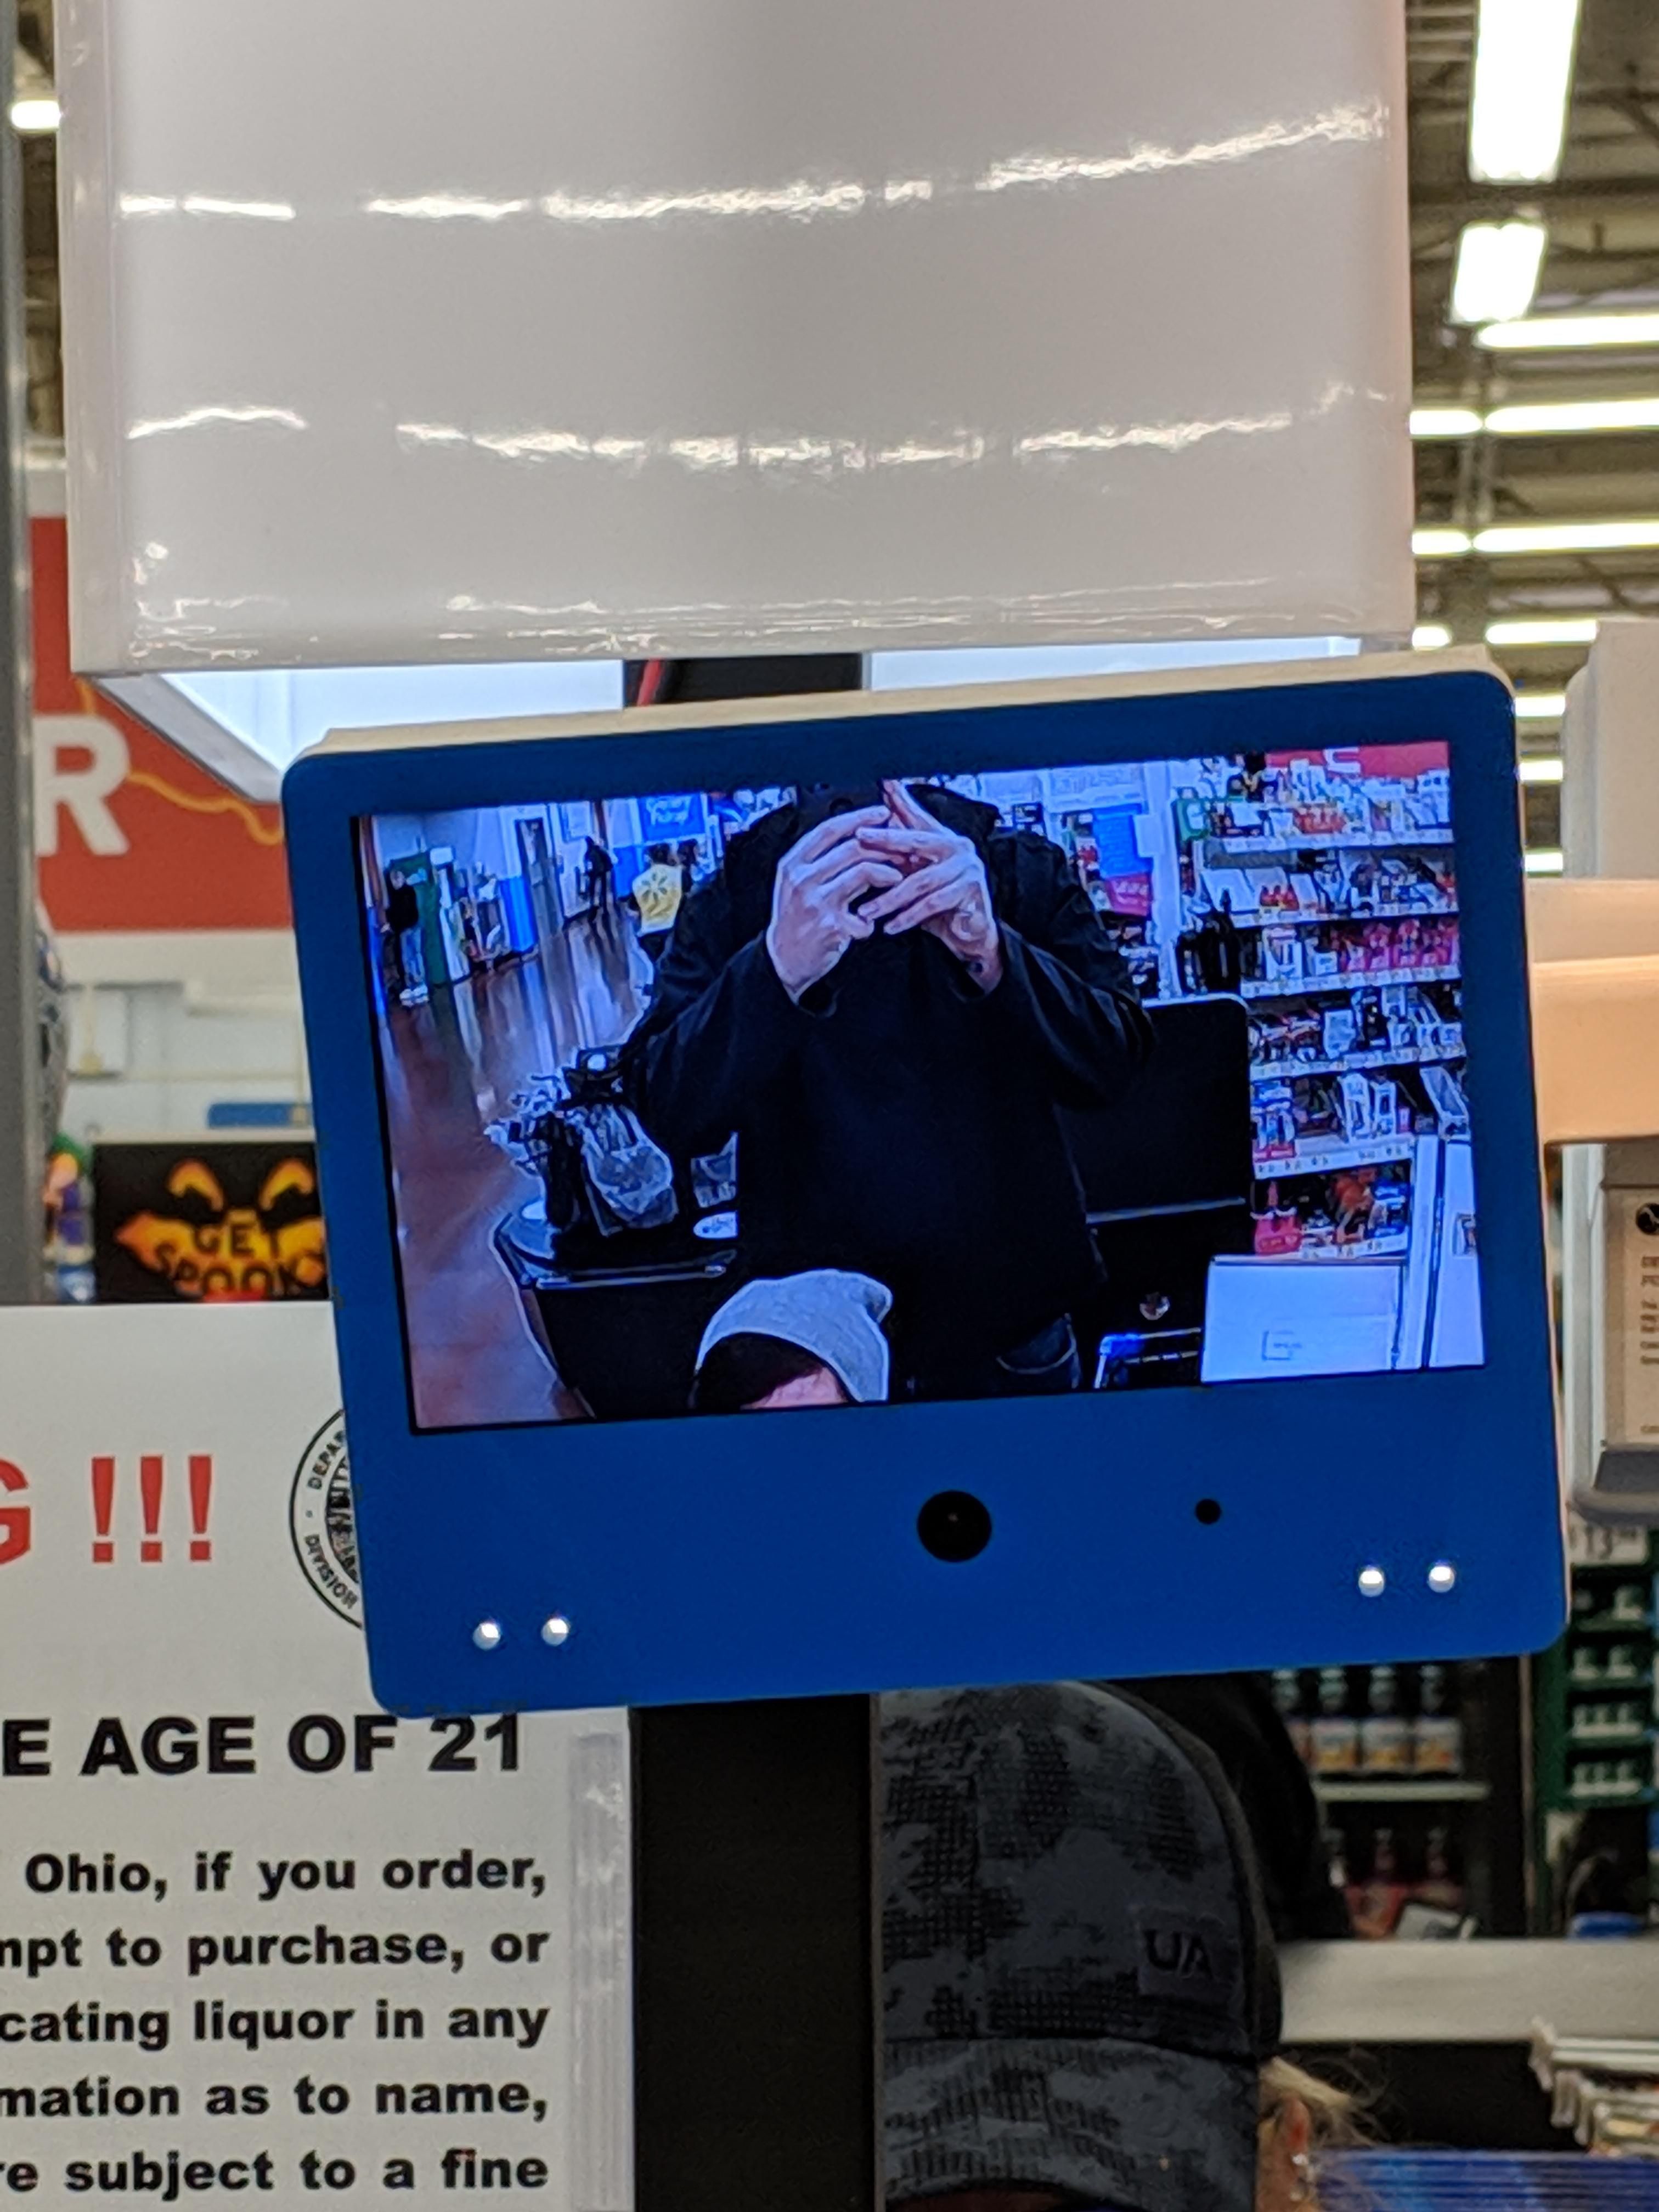 My girlfriend is too short for the Walmart self scan cameras and I'm too tall for them